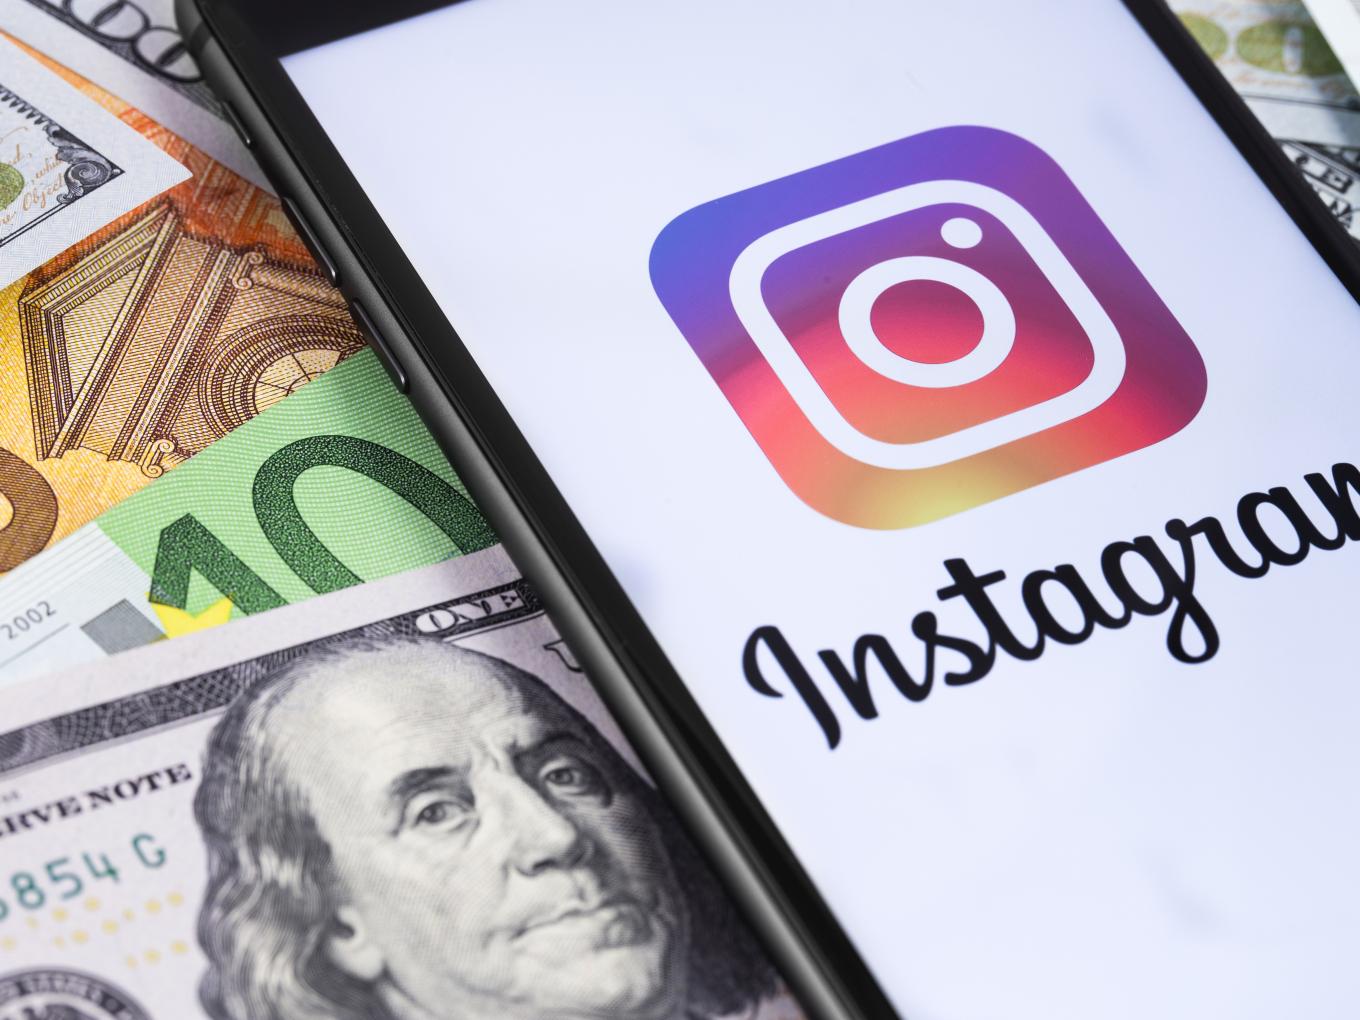 Instagram Ad Partner Banned For Scraping User Data Without Consent